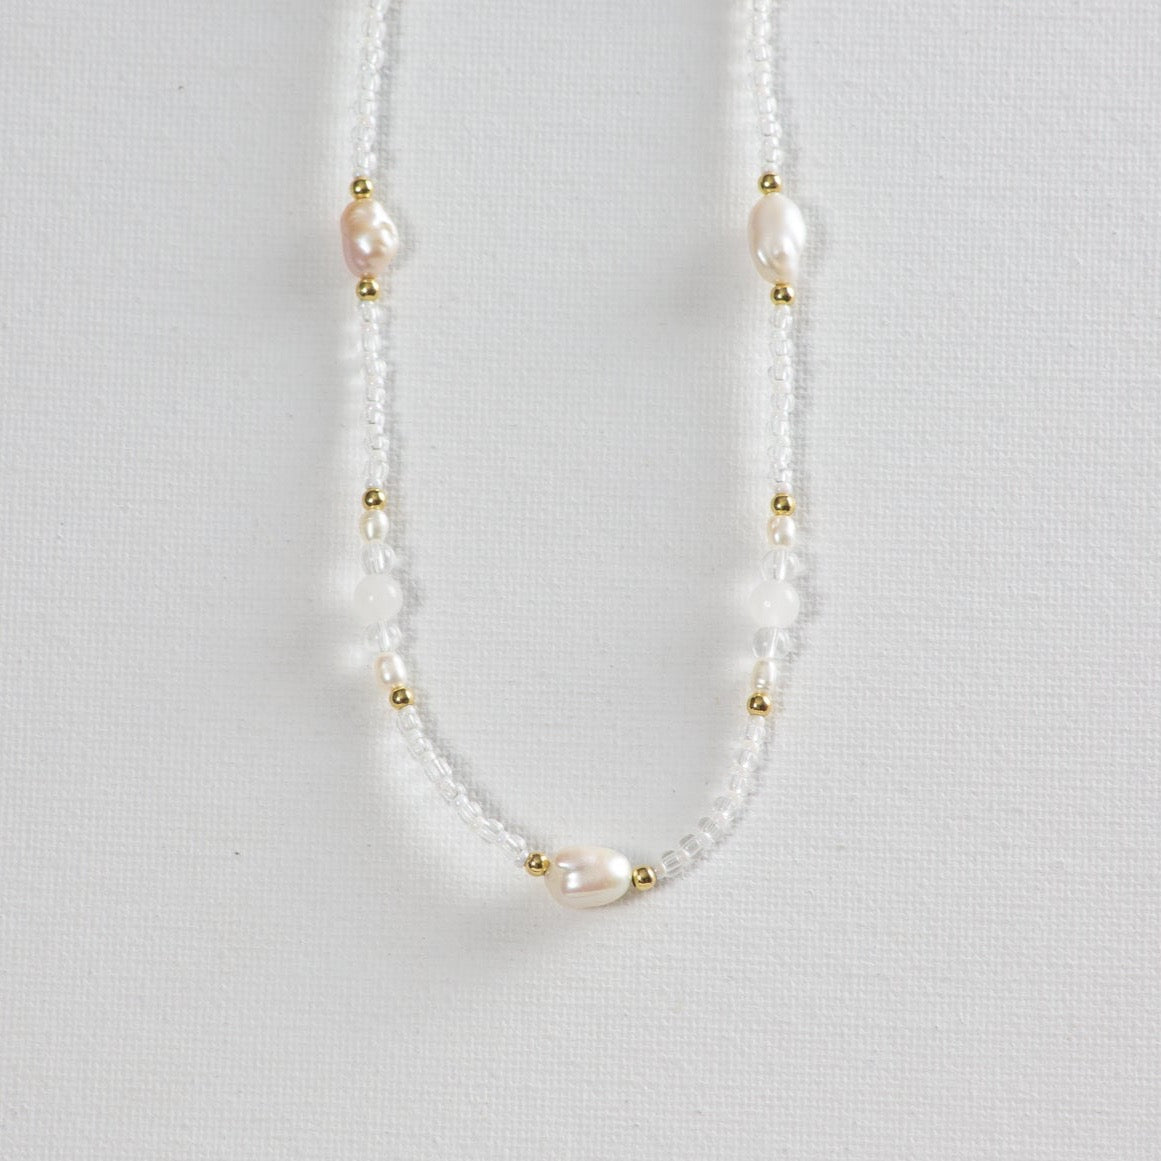 Beaded necklace featuring clear, gold, milky white glass, and pearl beads artfully arranged in alternating patterns.